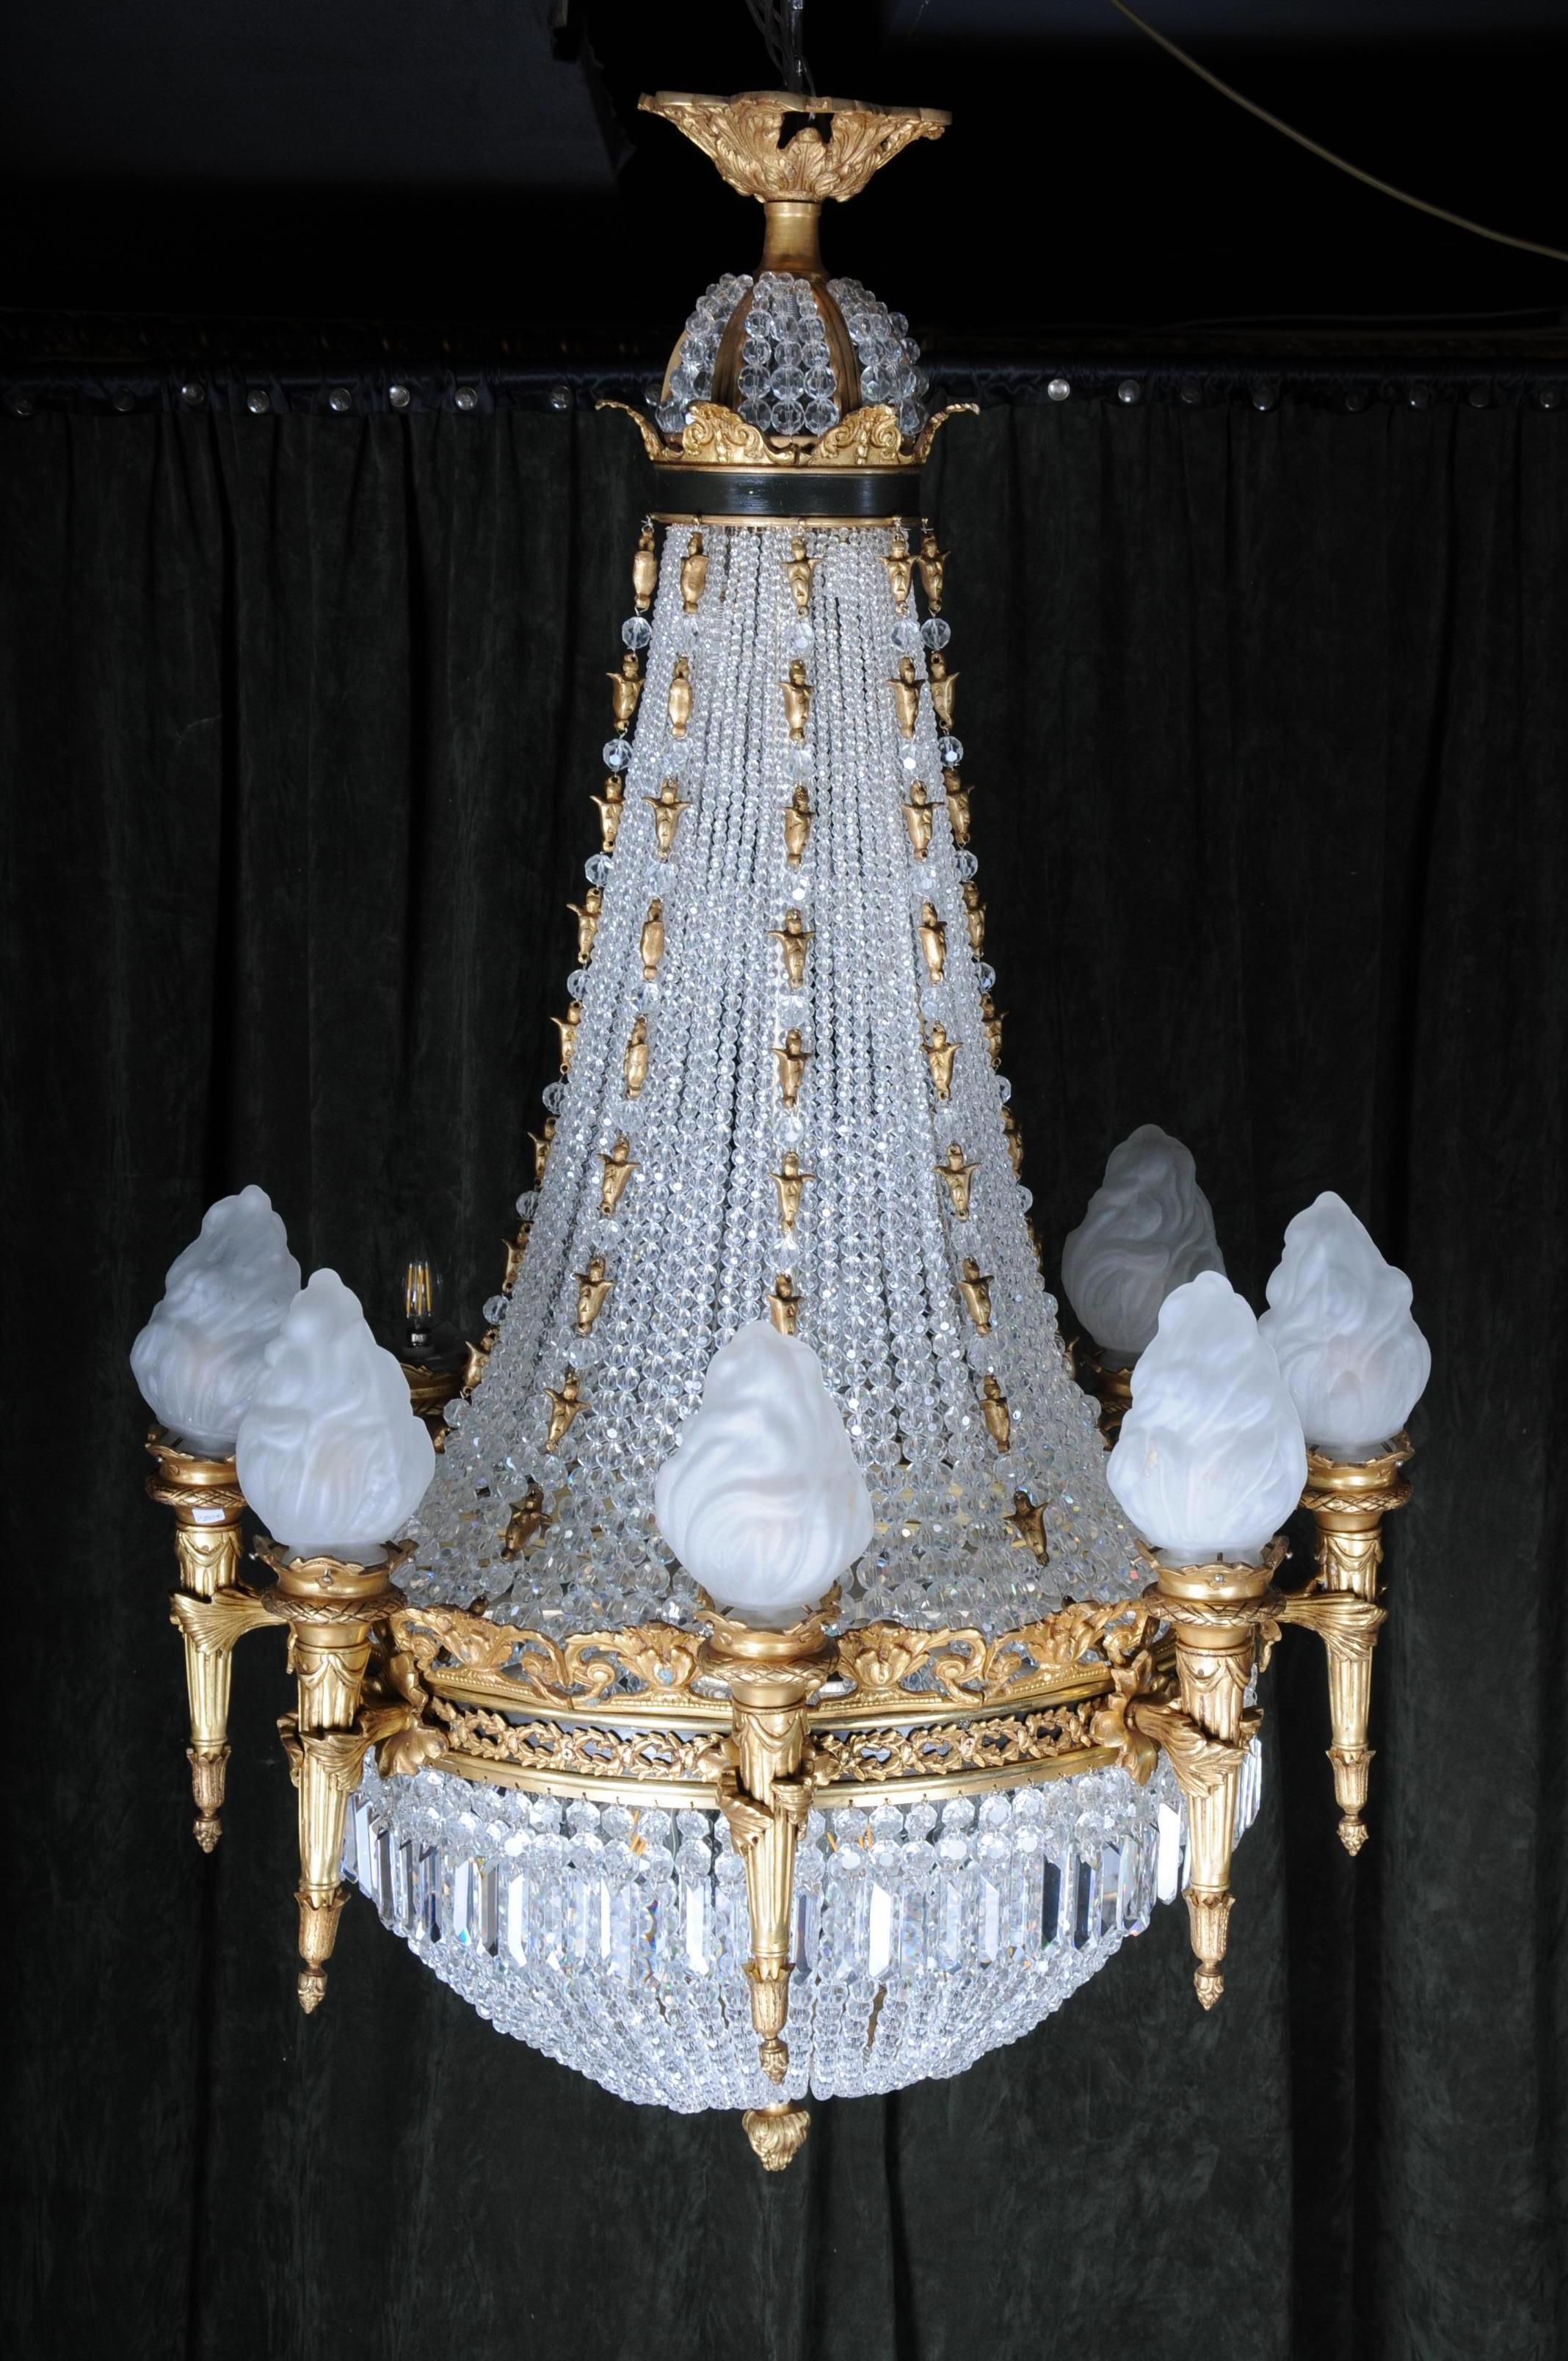 Splendid classicist ceiling candelabra / chandelier empire style
Fine, engraved and cast bronze. Basket-formed corpus from handcut Frenches ball prisms. Connected through wide, ornamental reliefed and broken hoop. There from 8 torch-formed Light